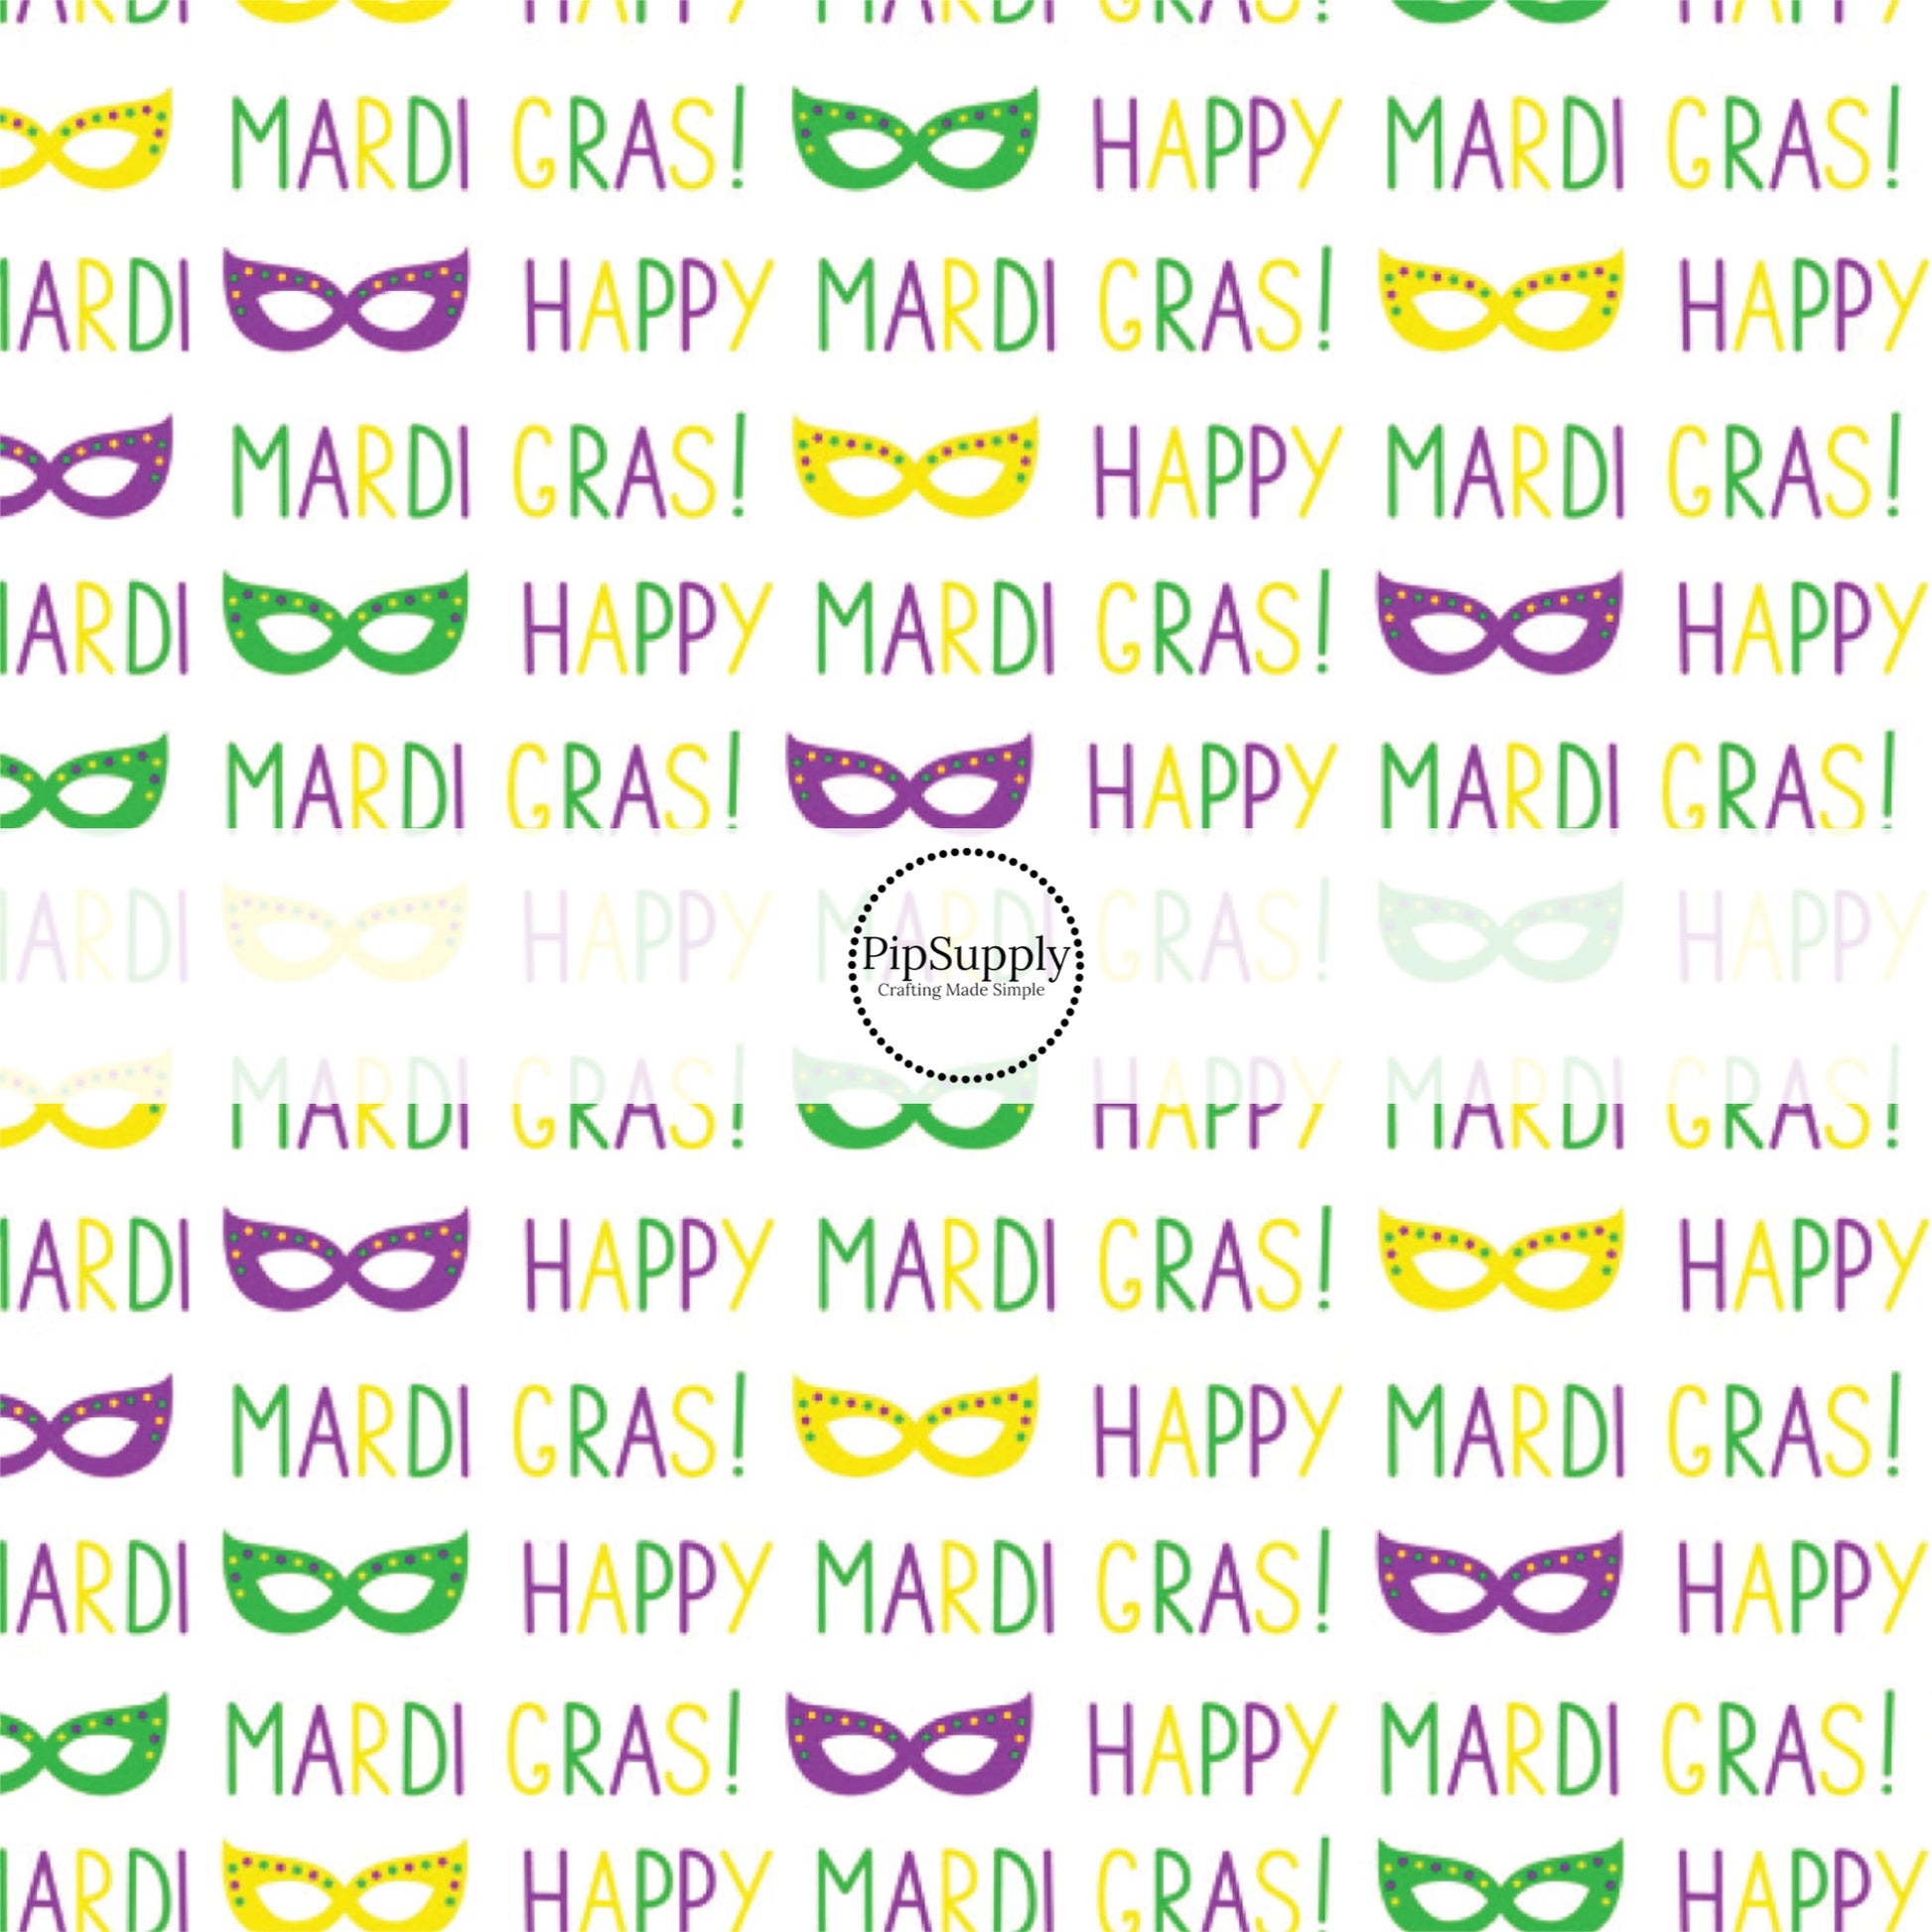 Purple, yellow, and purple mask with mardi gras written in purple, green, and yellow in capital letters bow strips